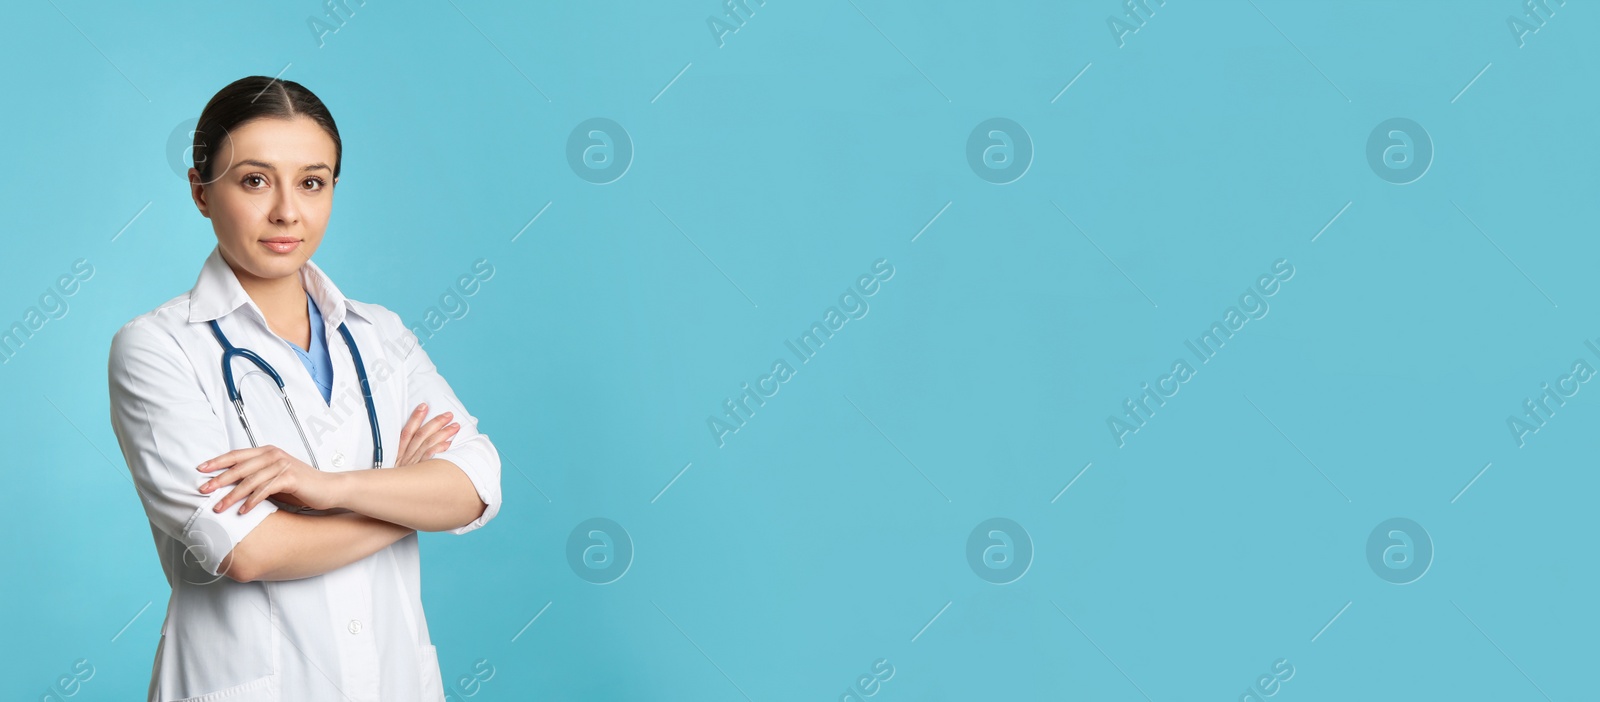 Photo of Pediatrician with stethoscope on turquoise background, space for text